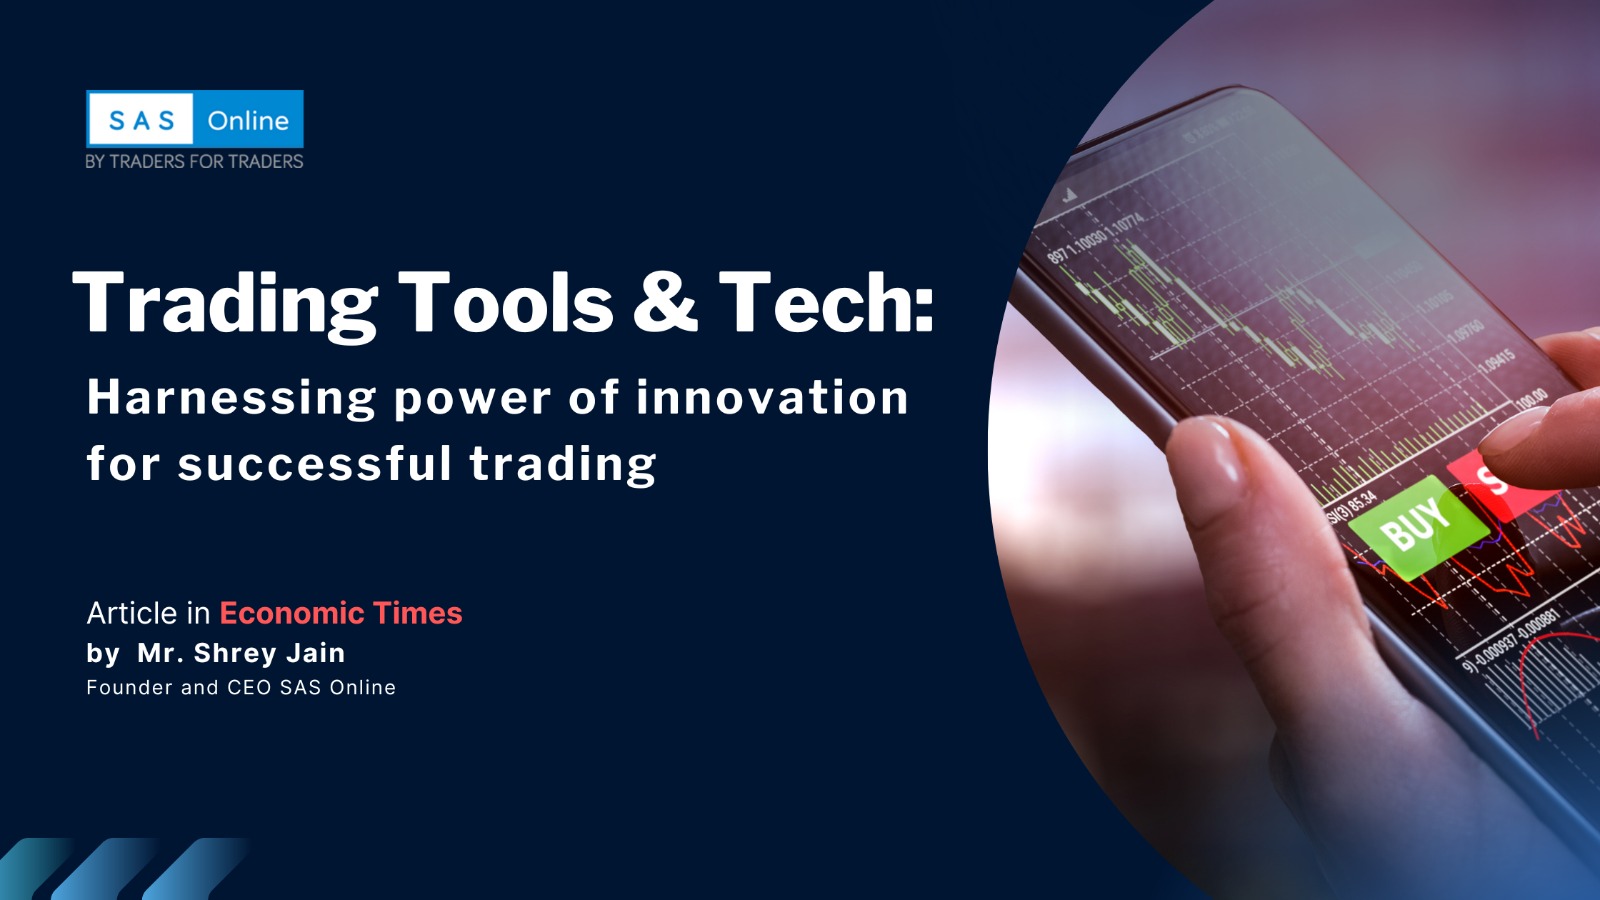 Trading Tools & Tech: Harnessing power of innovation for successful trading